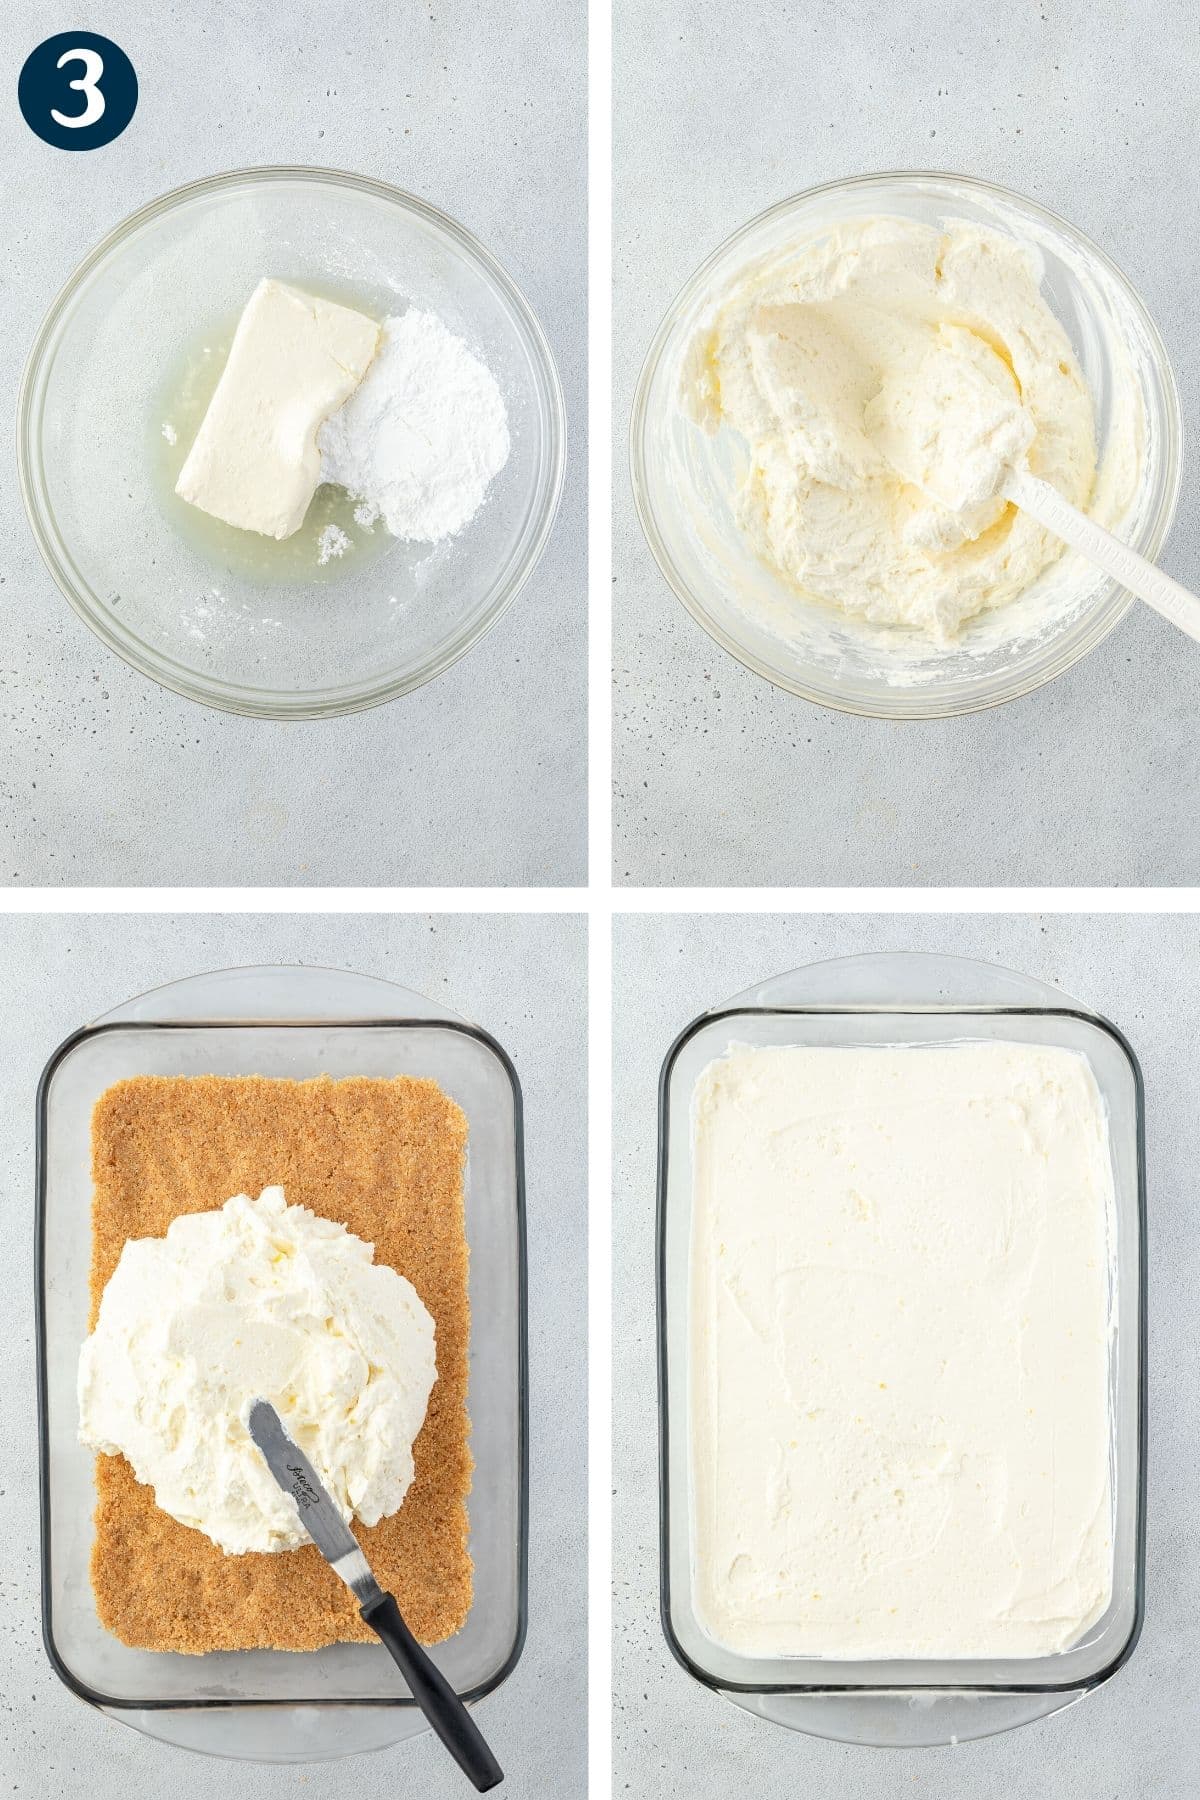 4 images showing the cheesecake filling ingredients in a bowl, blended together, and spreading onto the crust.